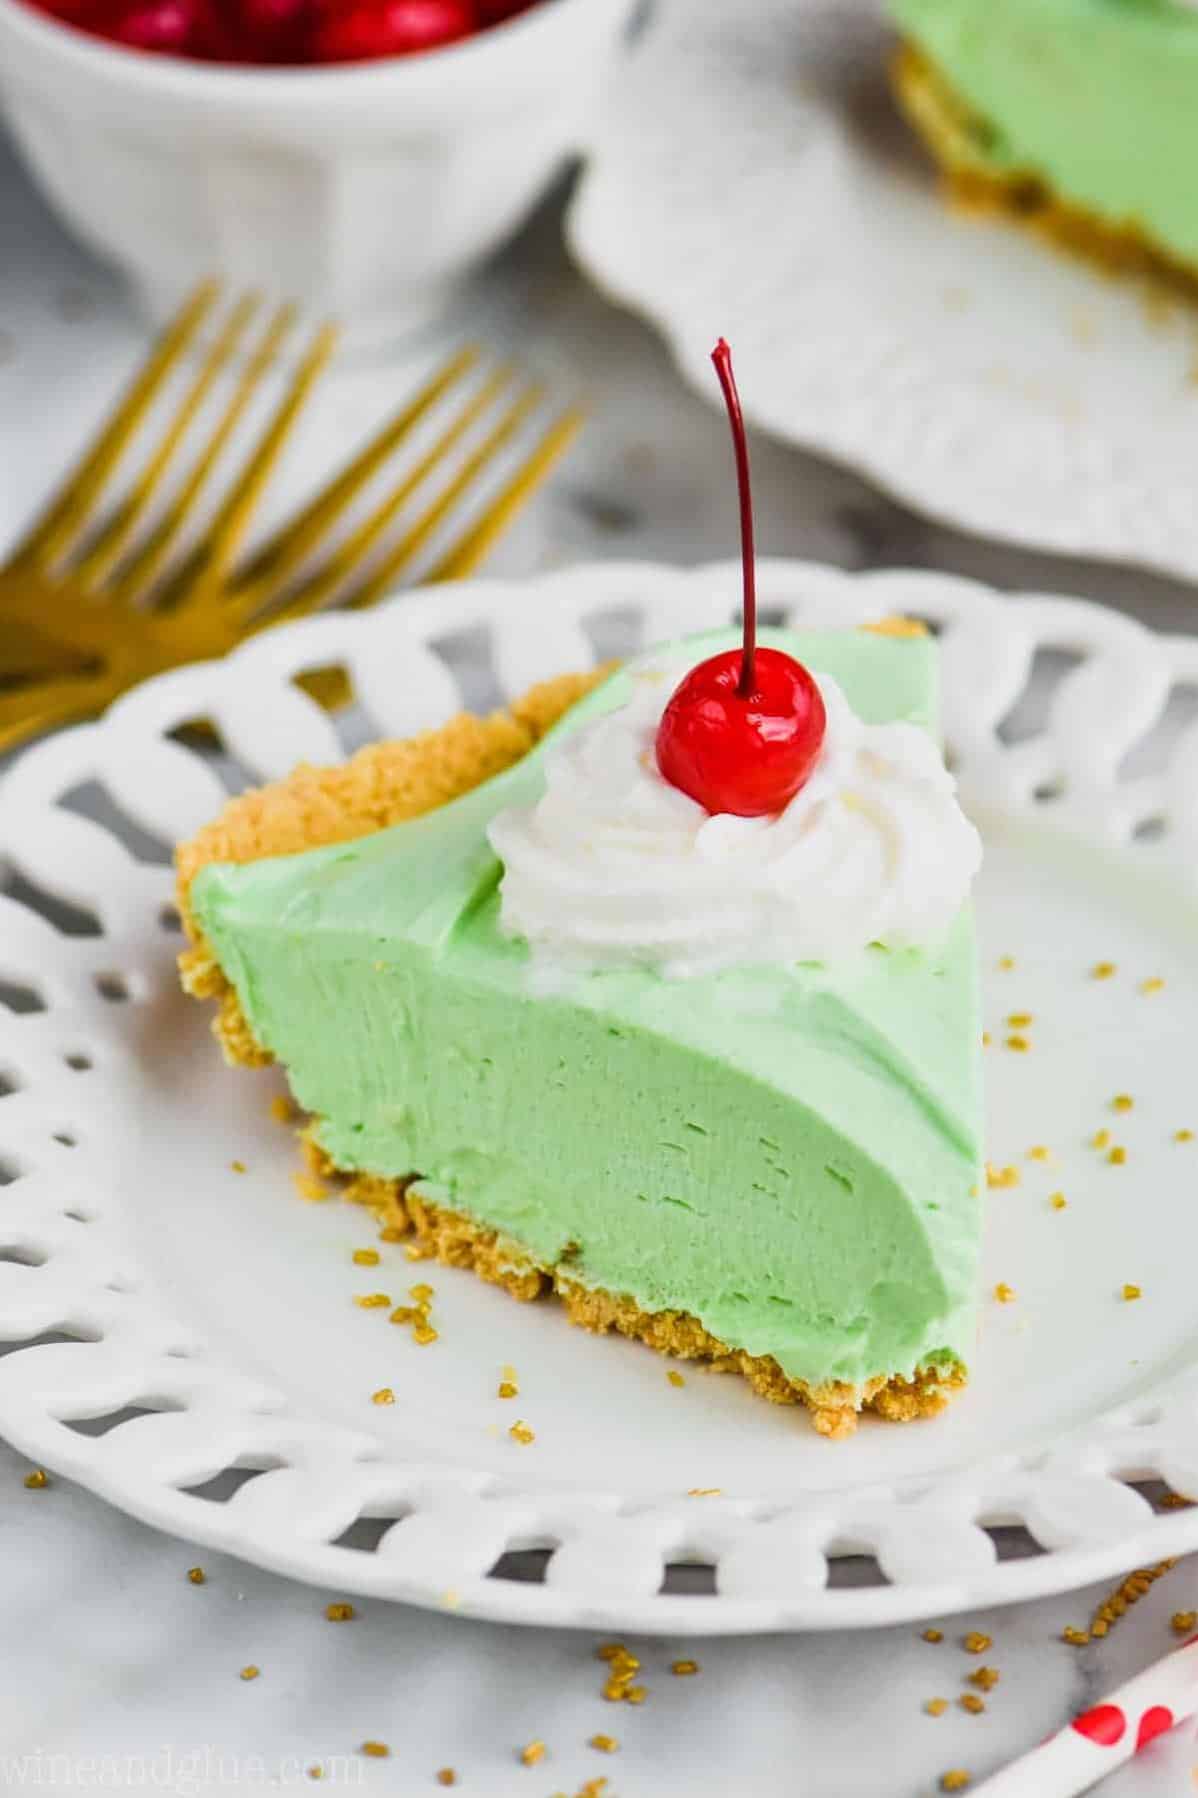 Delicious Shamrock Pie Recipe for St. Patrick’s Day!